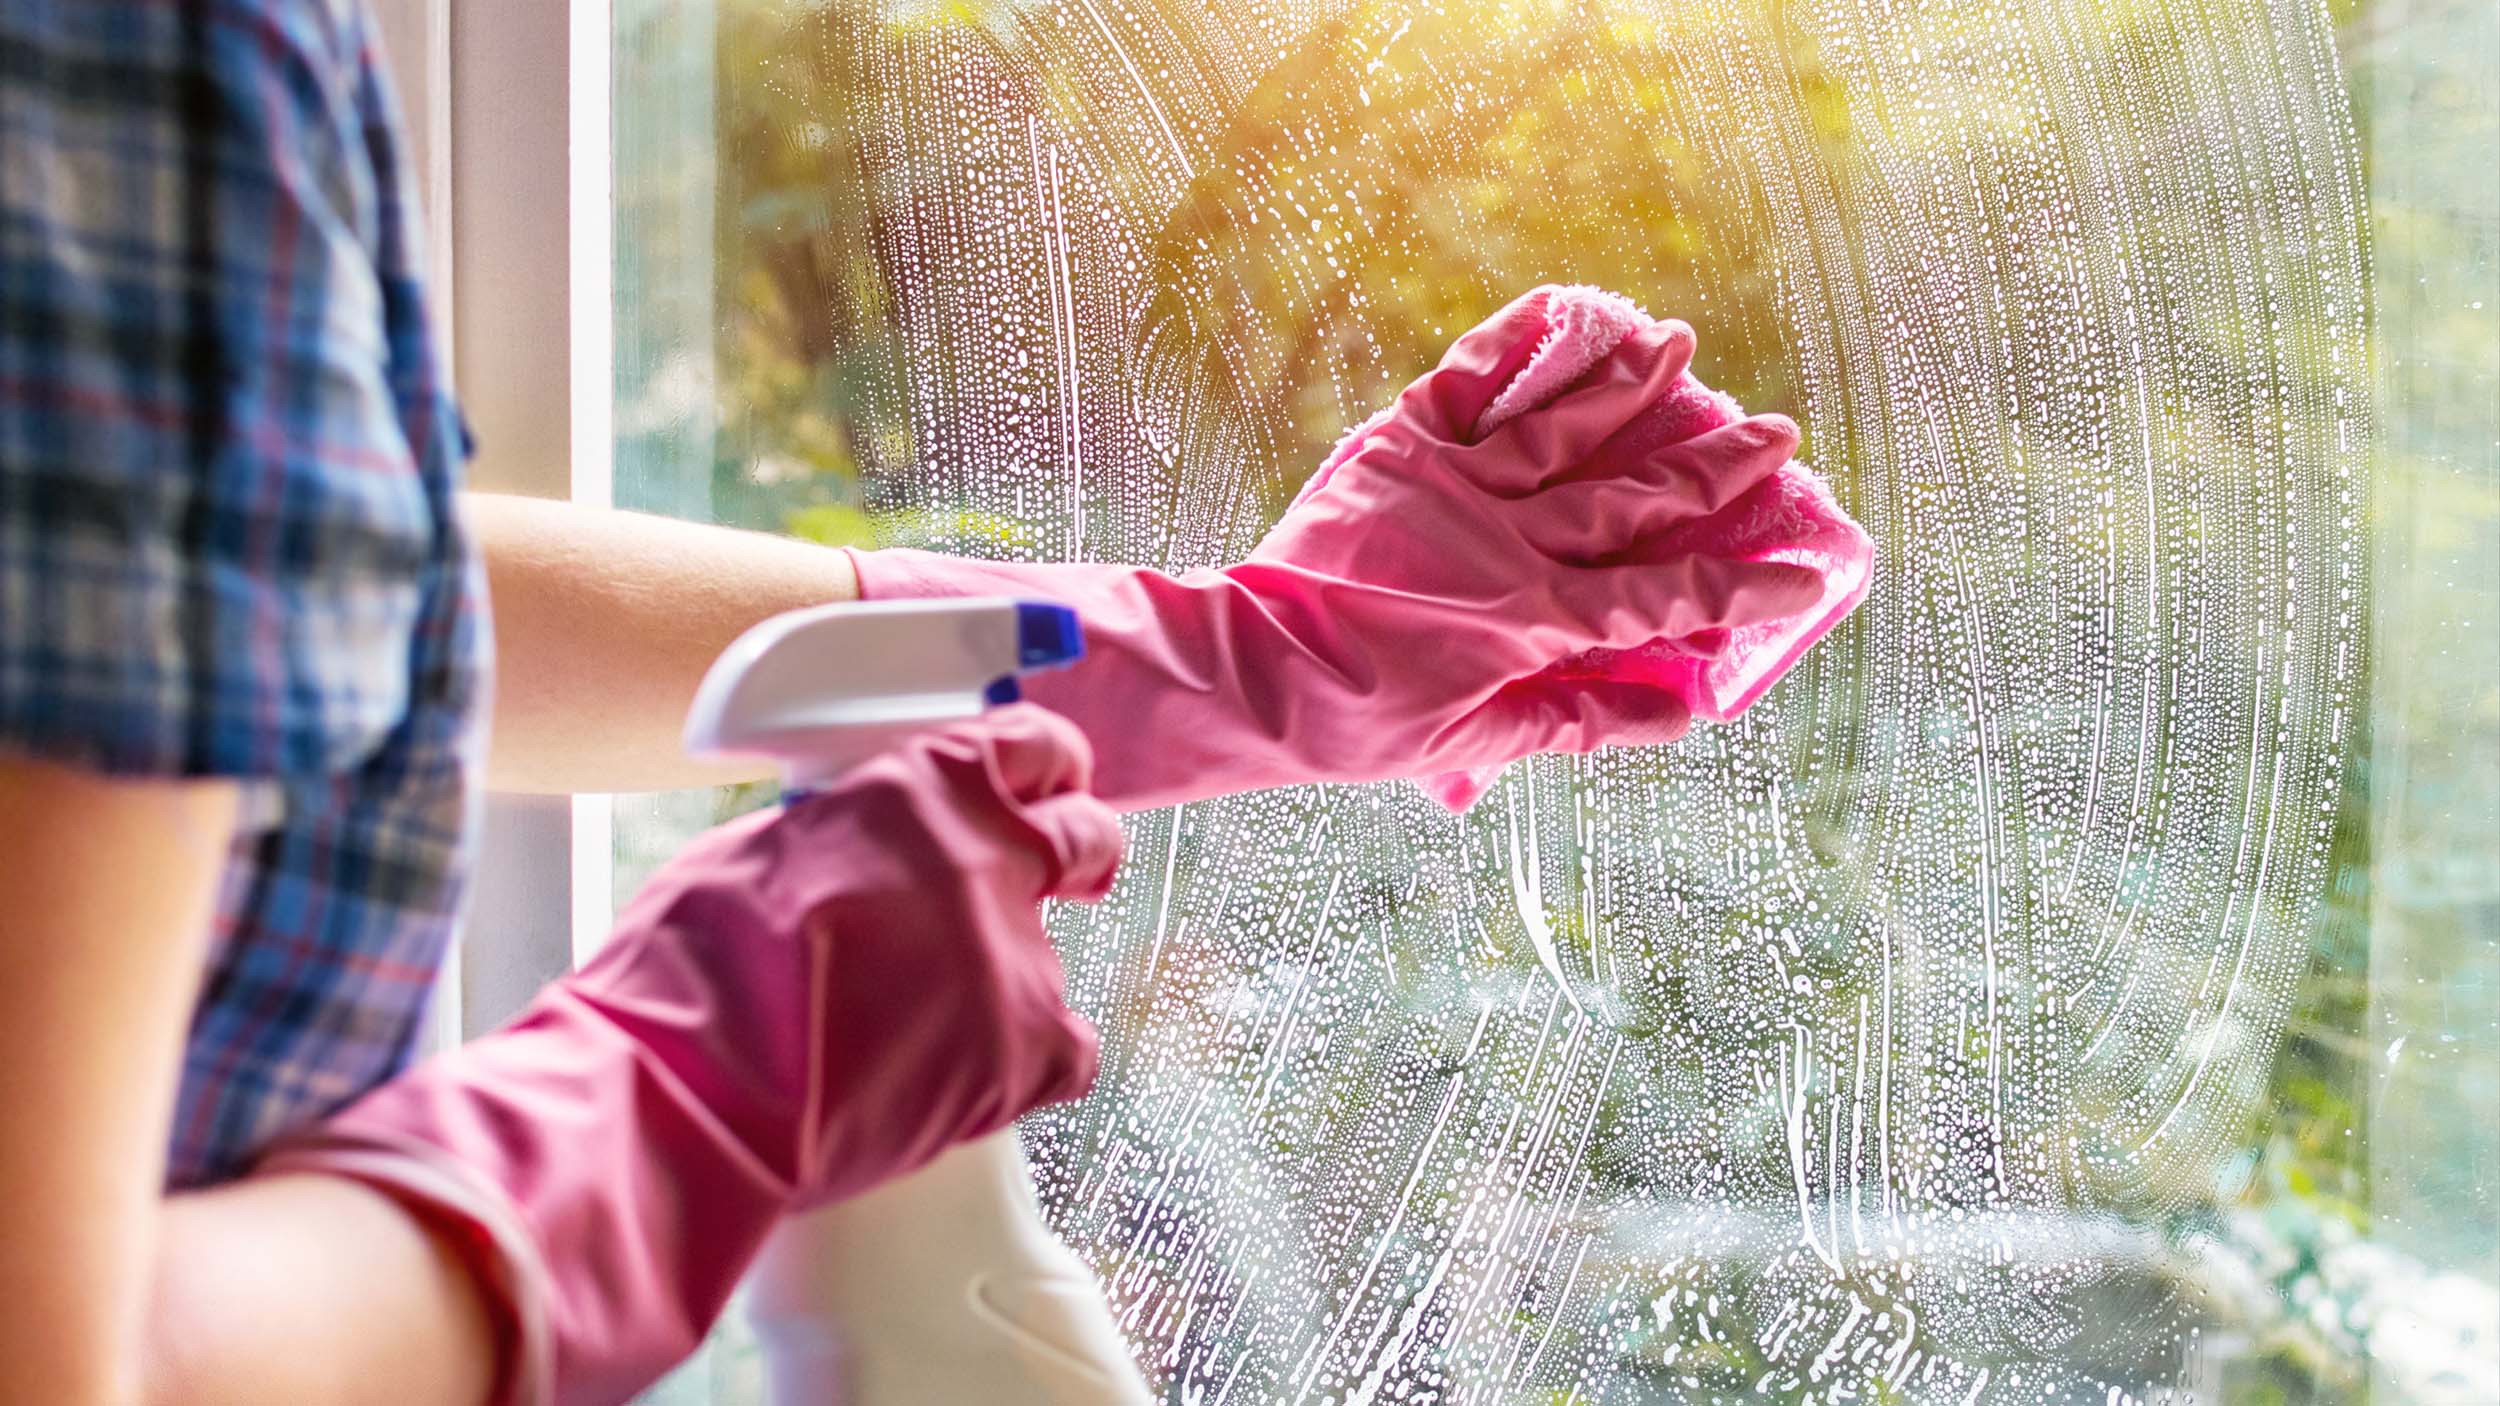 How to clean windows with less streaks for more natural sunlight | CNN Underscored